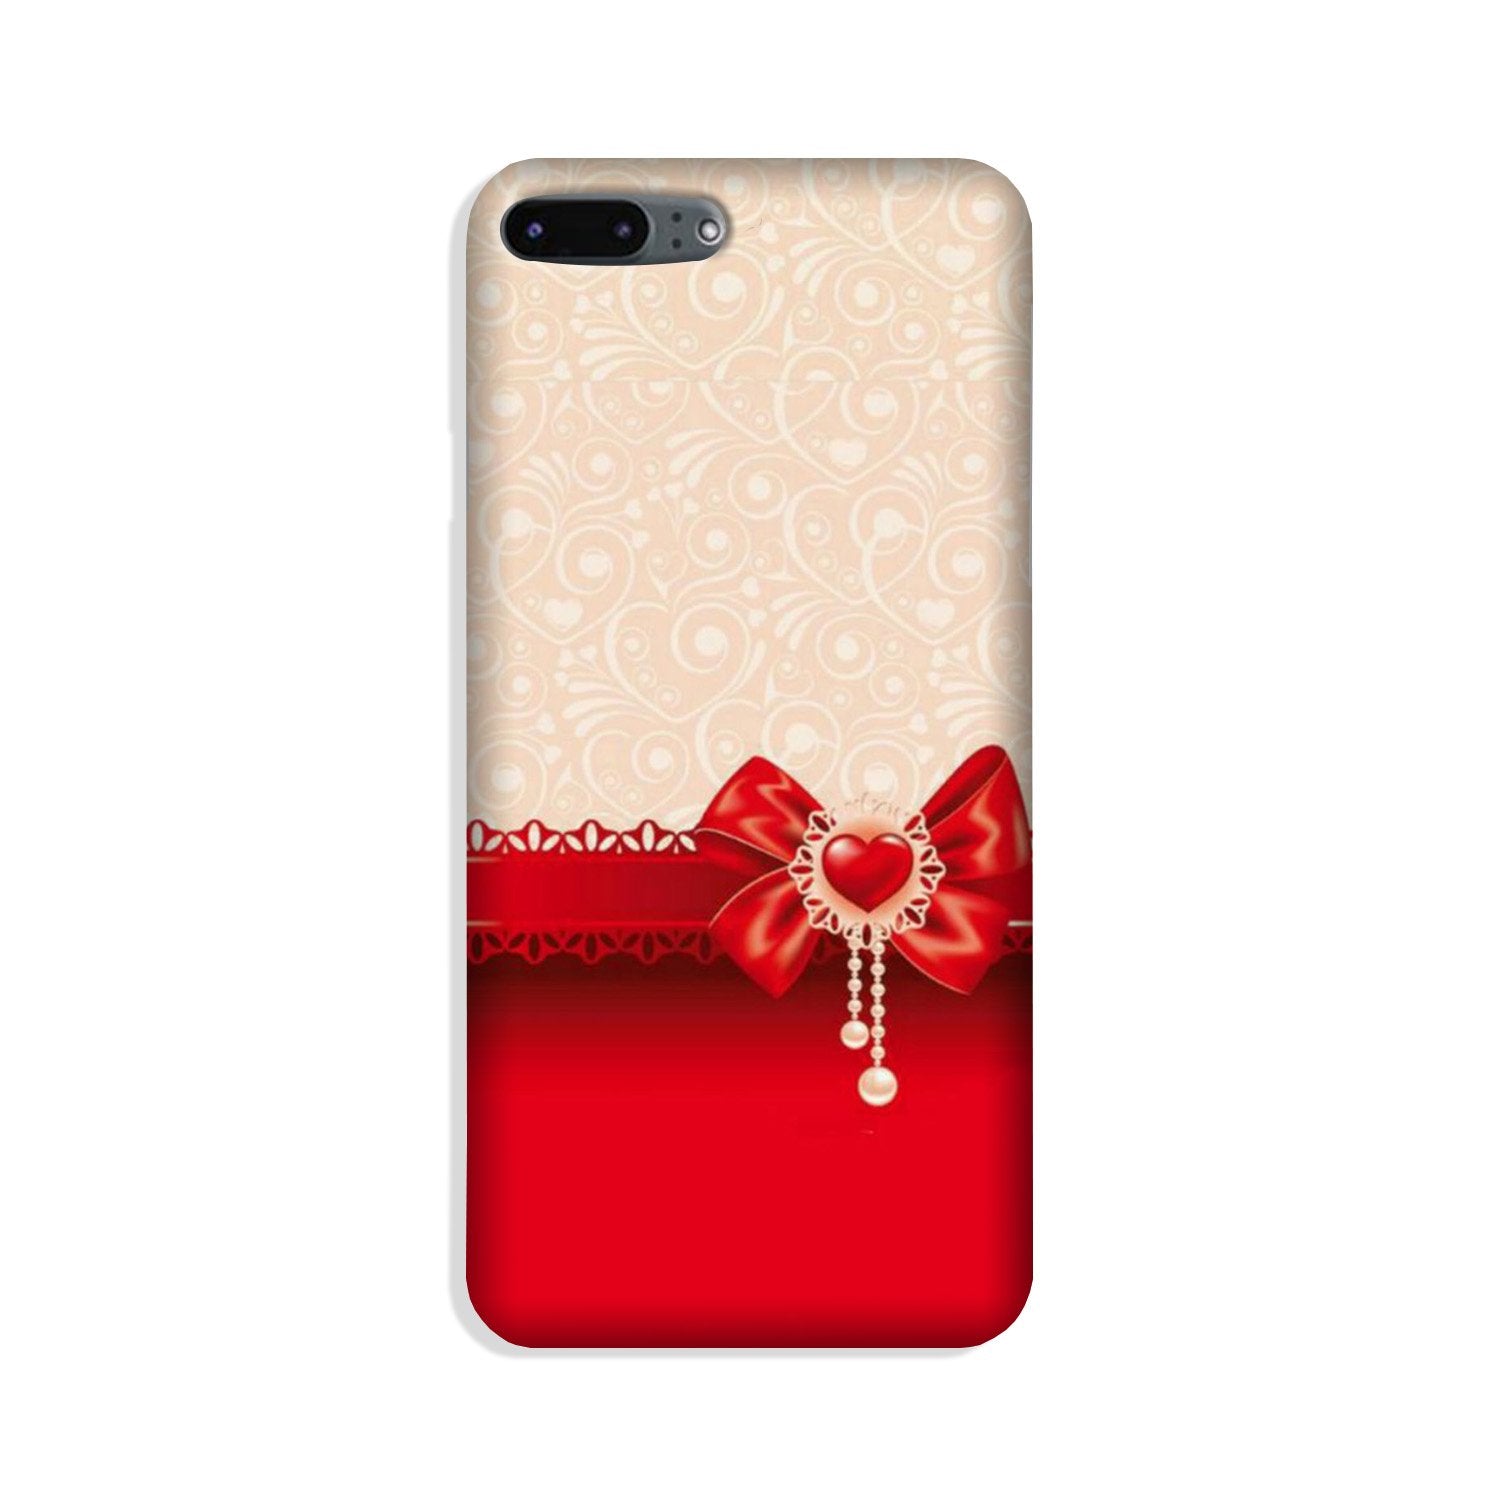 Gift Wrap3 Case for iPhone 8 Plus